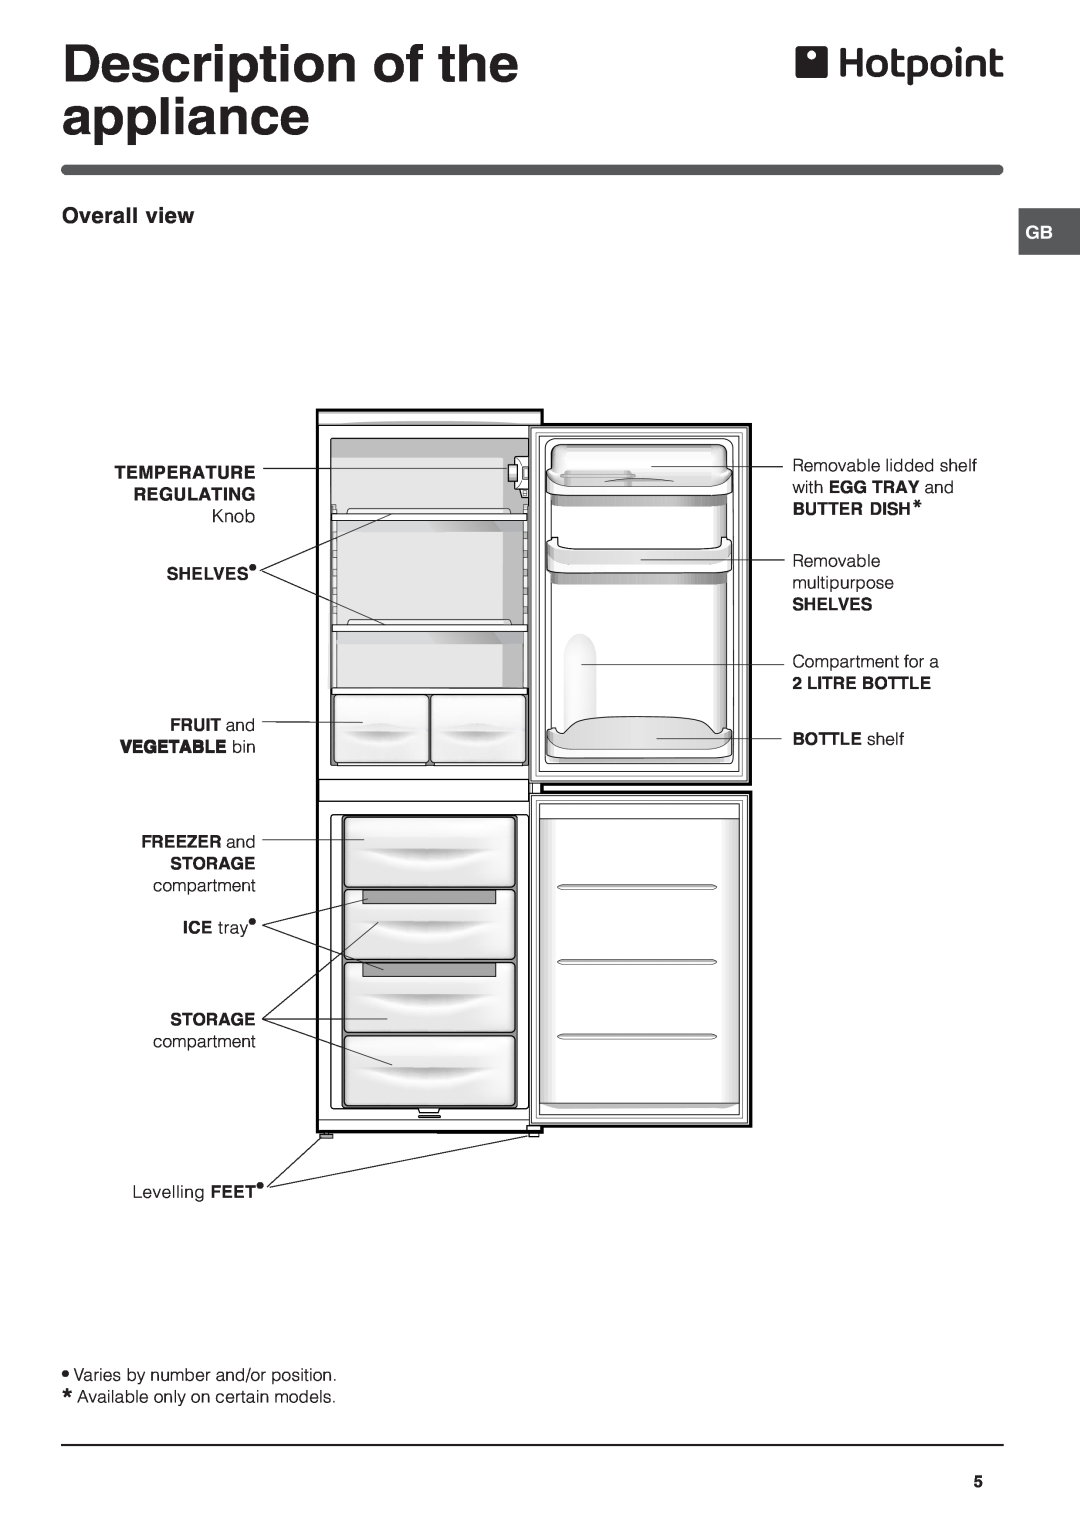 Hotpoint RFA52T, RFA52P, RFA52S Description of the appliance, Temperature, Regulating, VEGETABLE bin, FREEZER and, Storage 